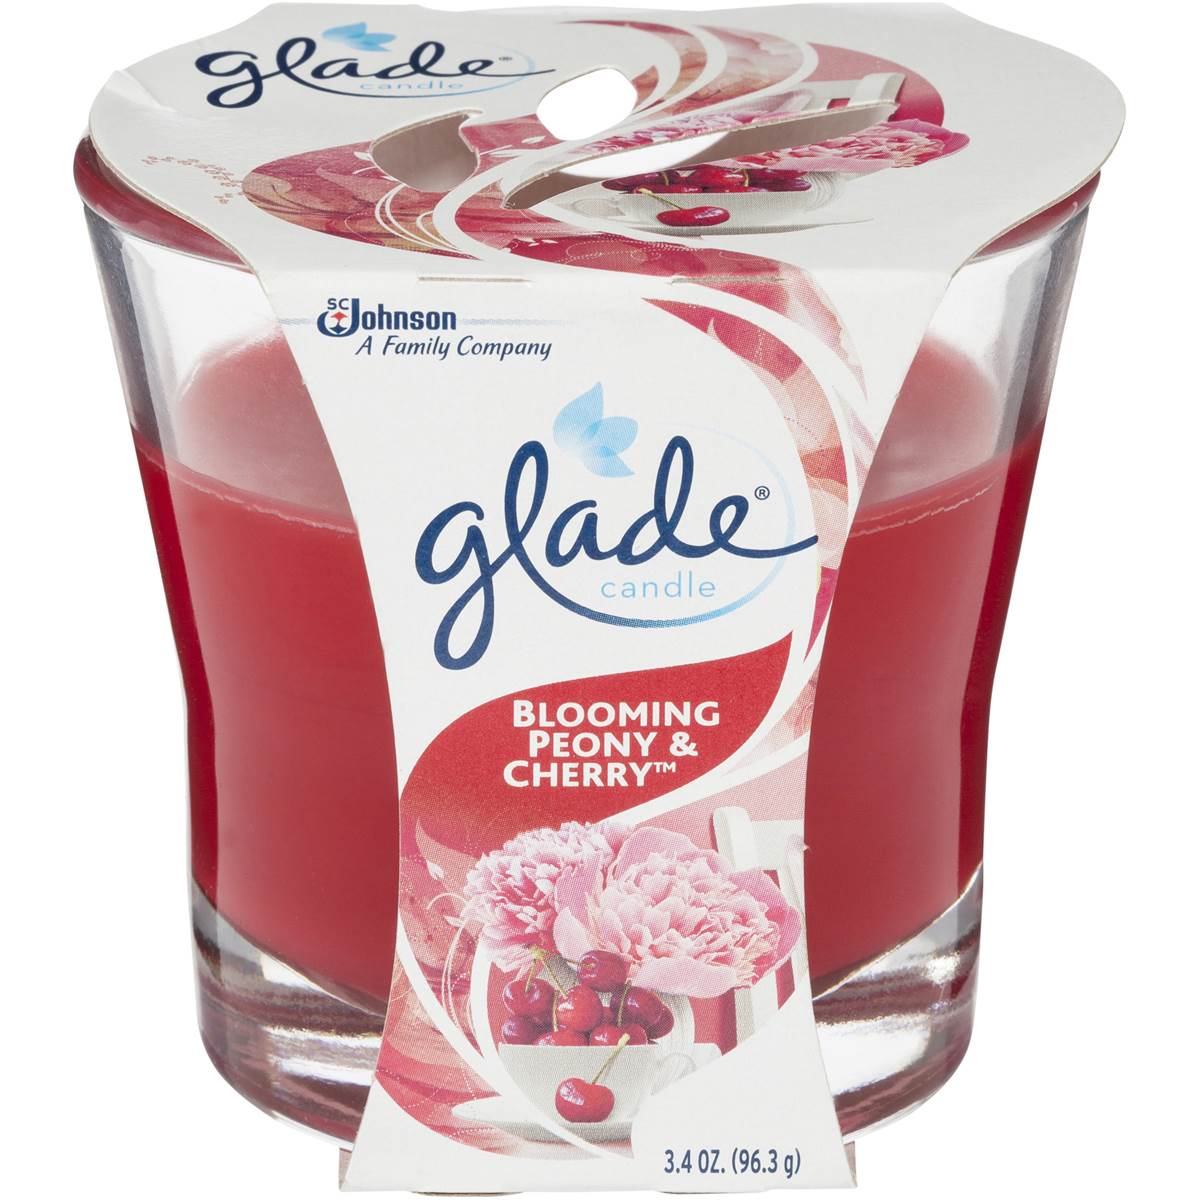 Glade Candle Blooming Peony & Cherry